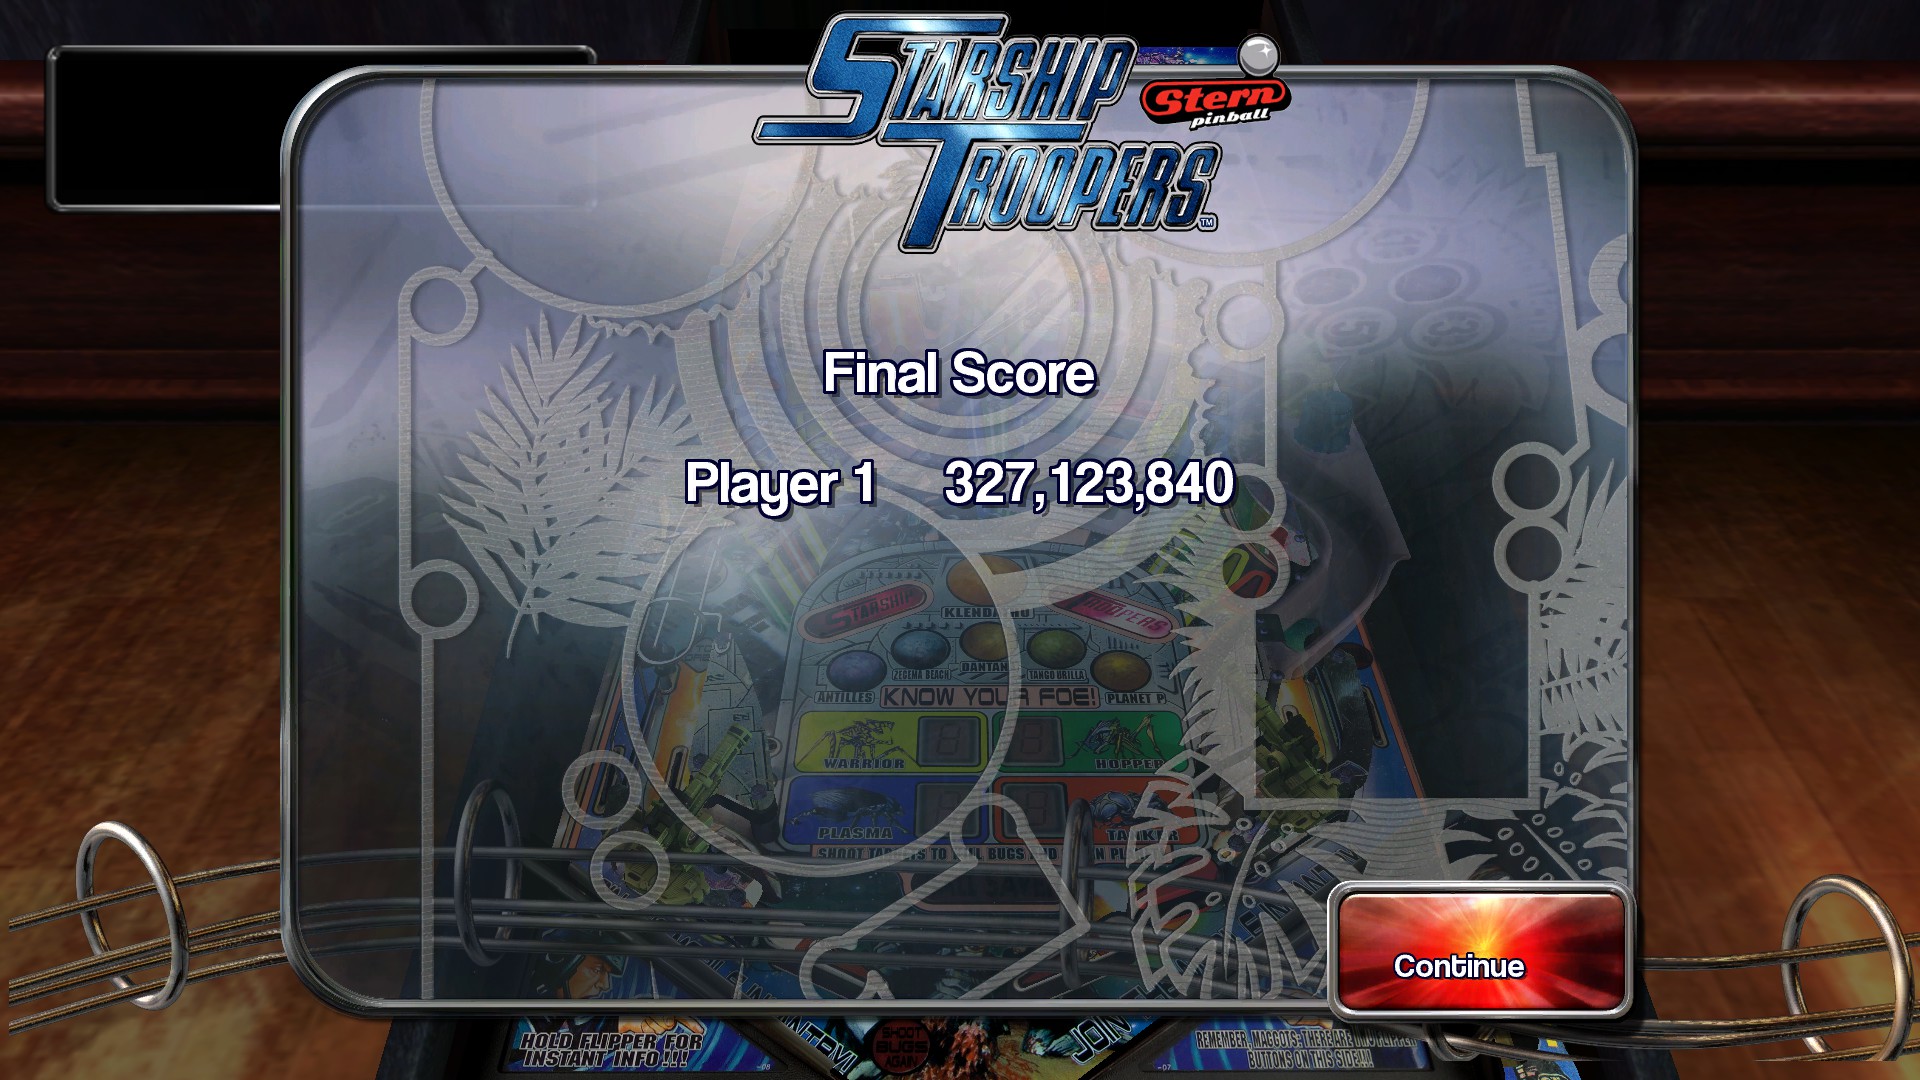 TheTrickster: Pinball Arcade: Starship Troopers (PC) 327,123,840 points on 2016-03-02 04:13:01